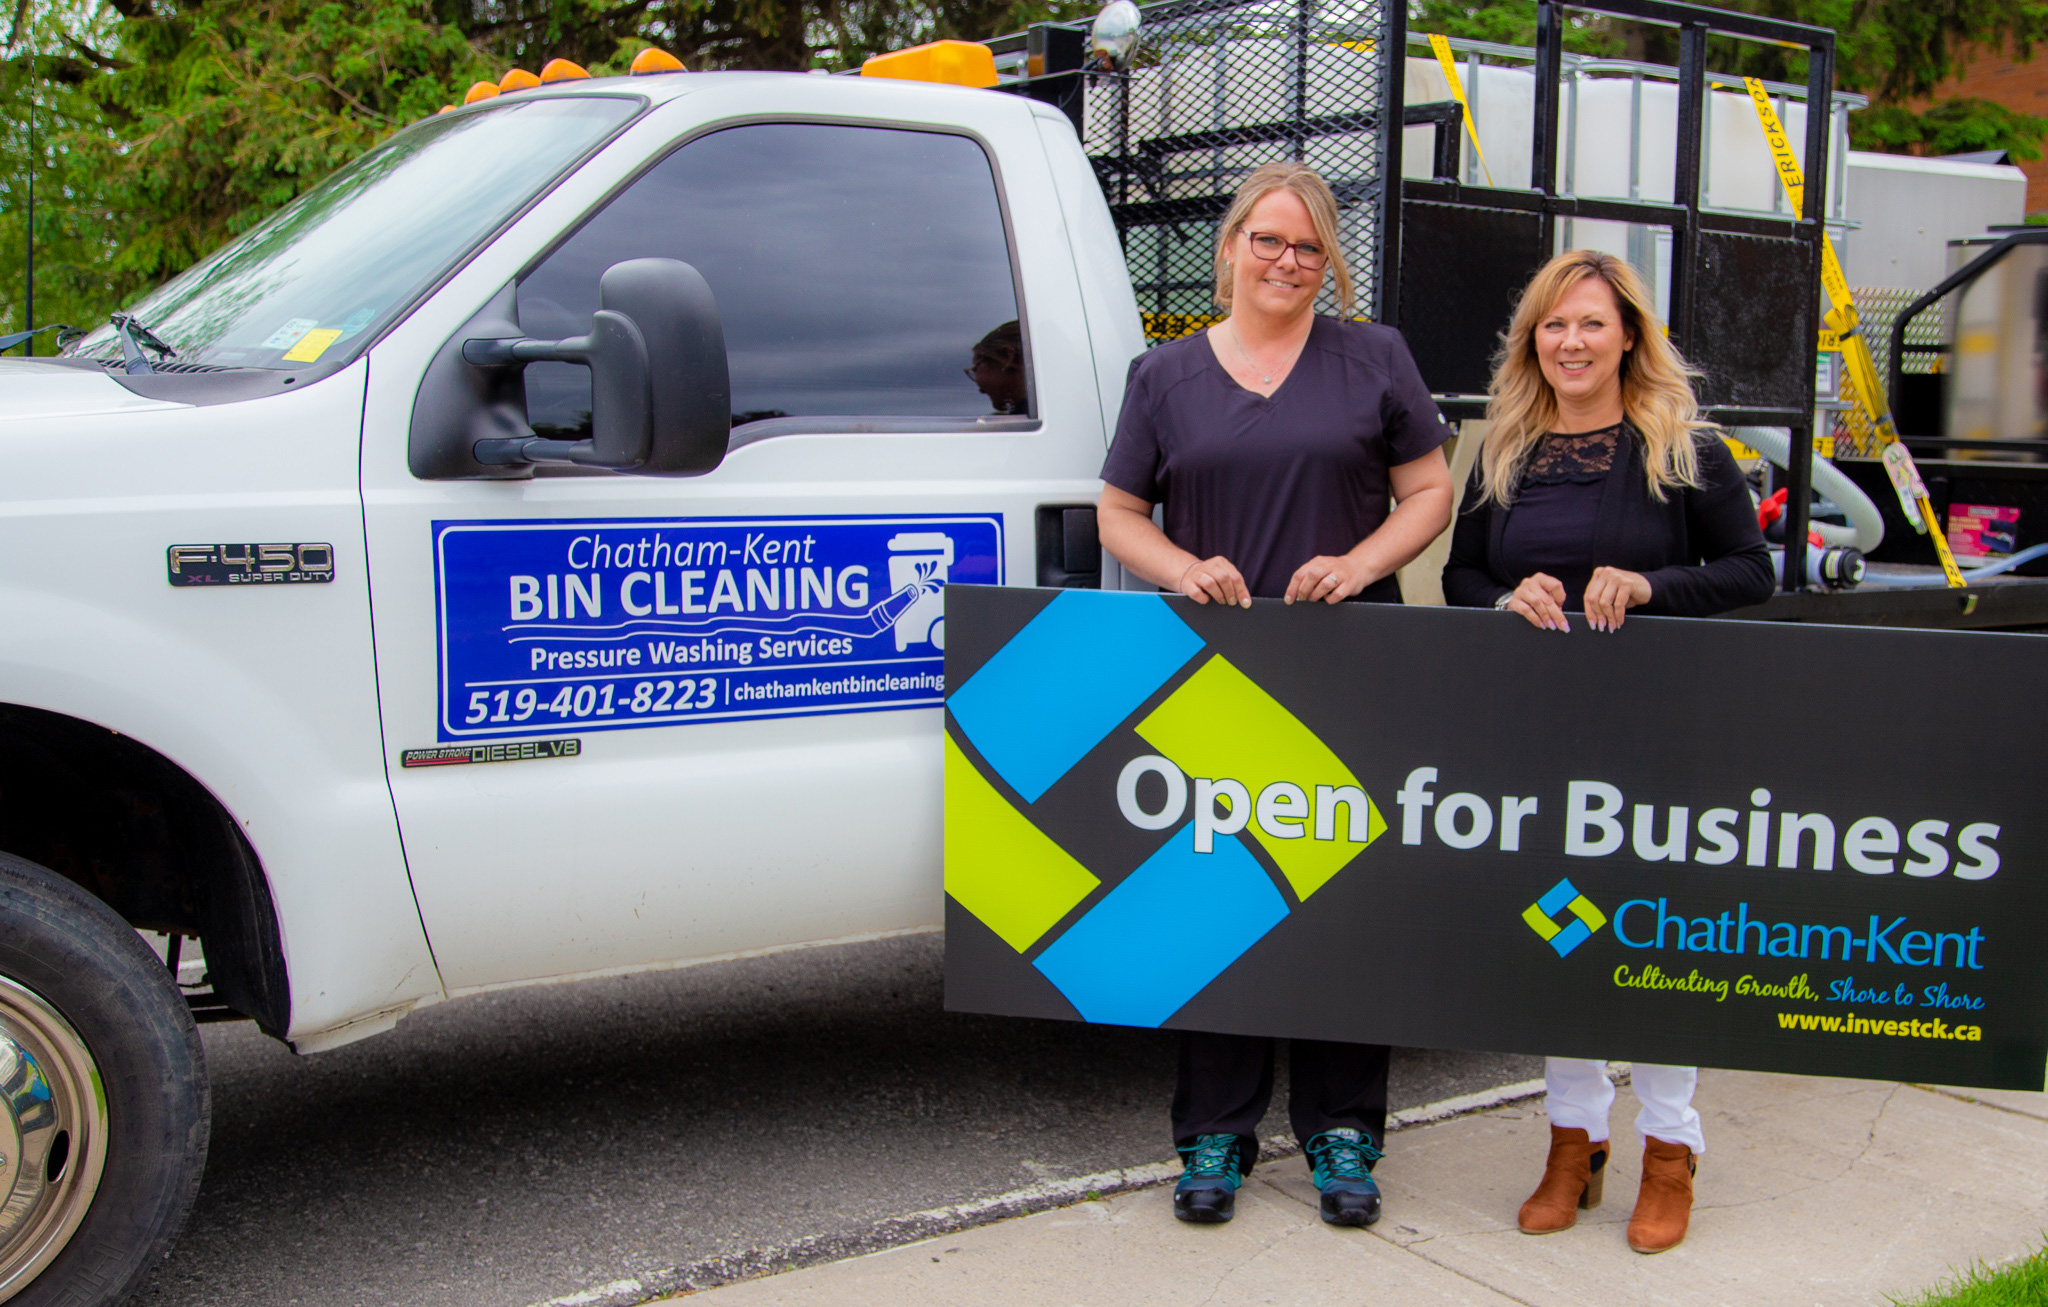 Chatham-Kent Bin Cleaning is officially open for businesses